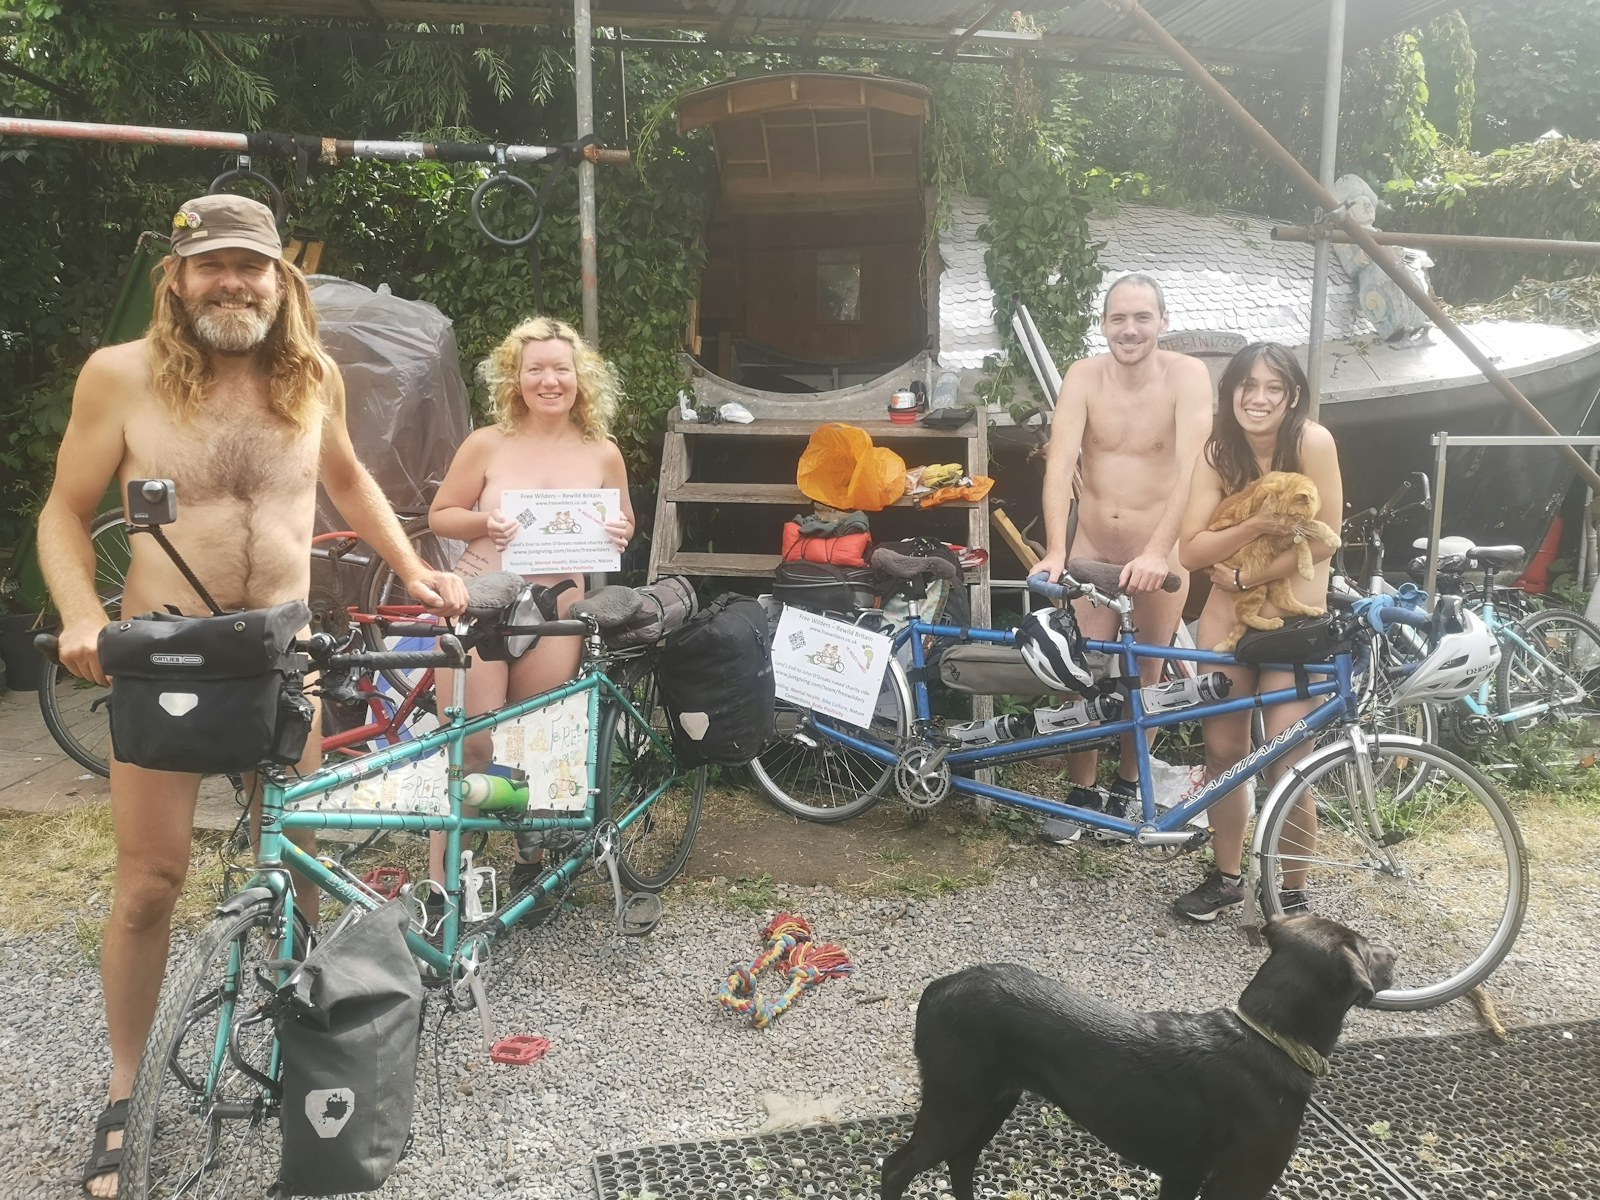 Four people wearing nothing on their naked cycle for charity